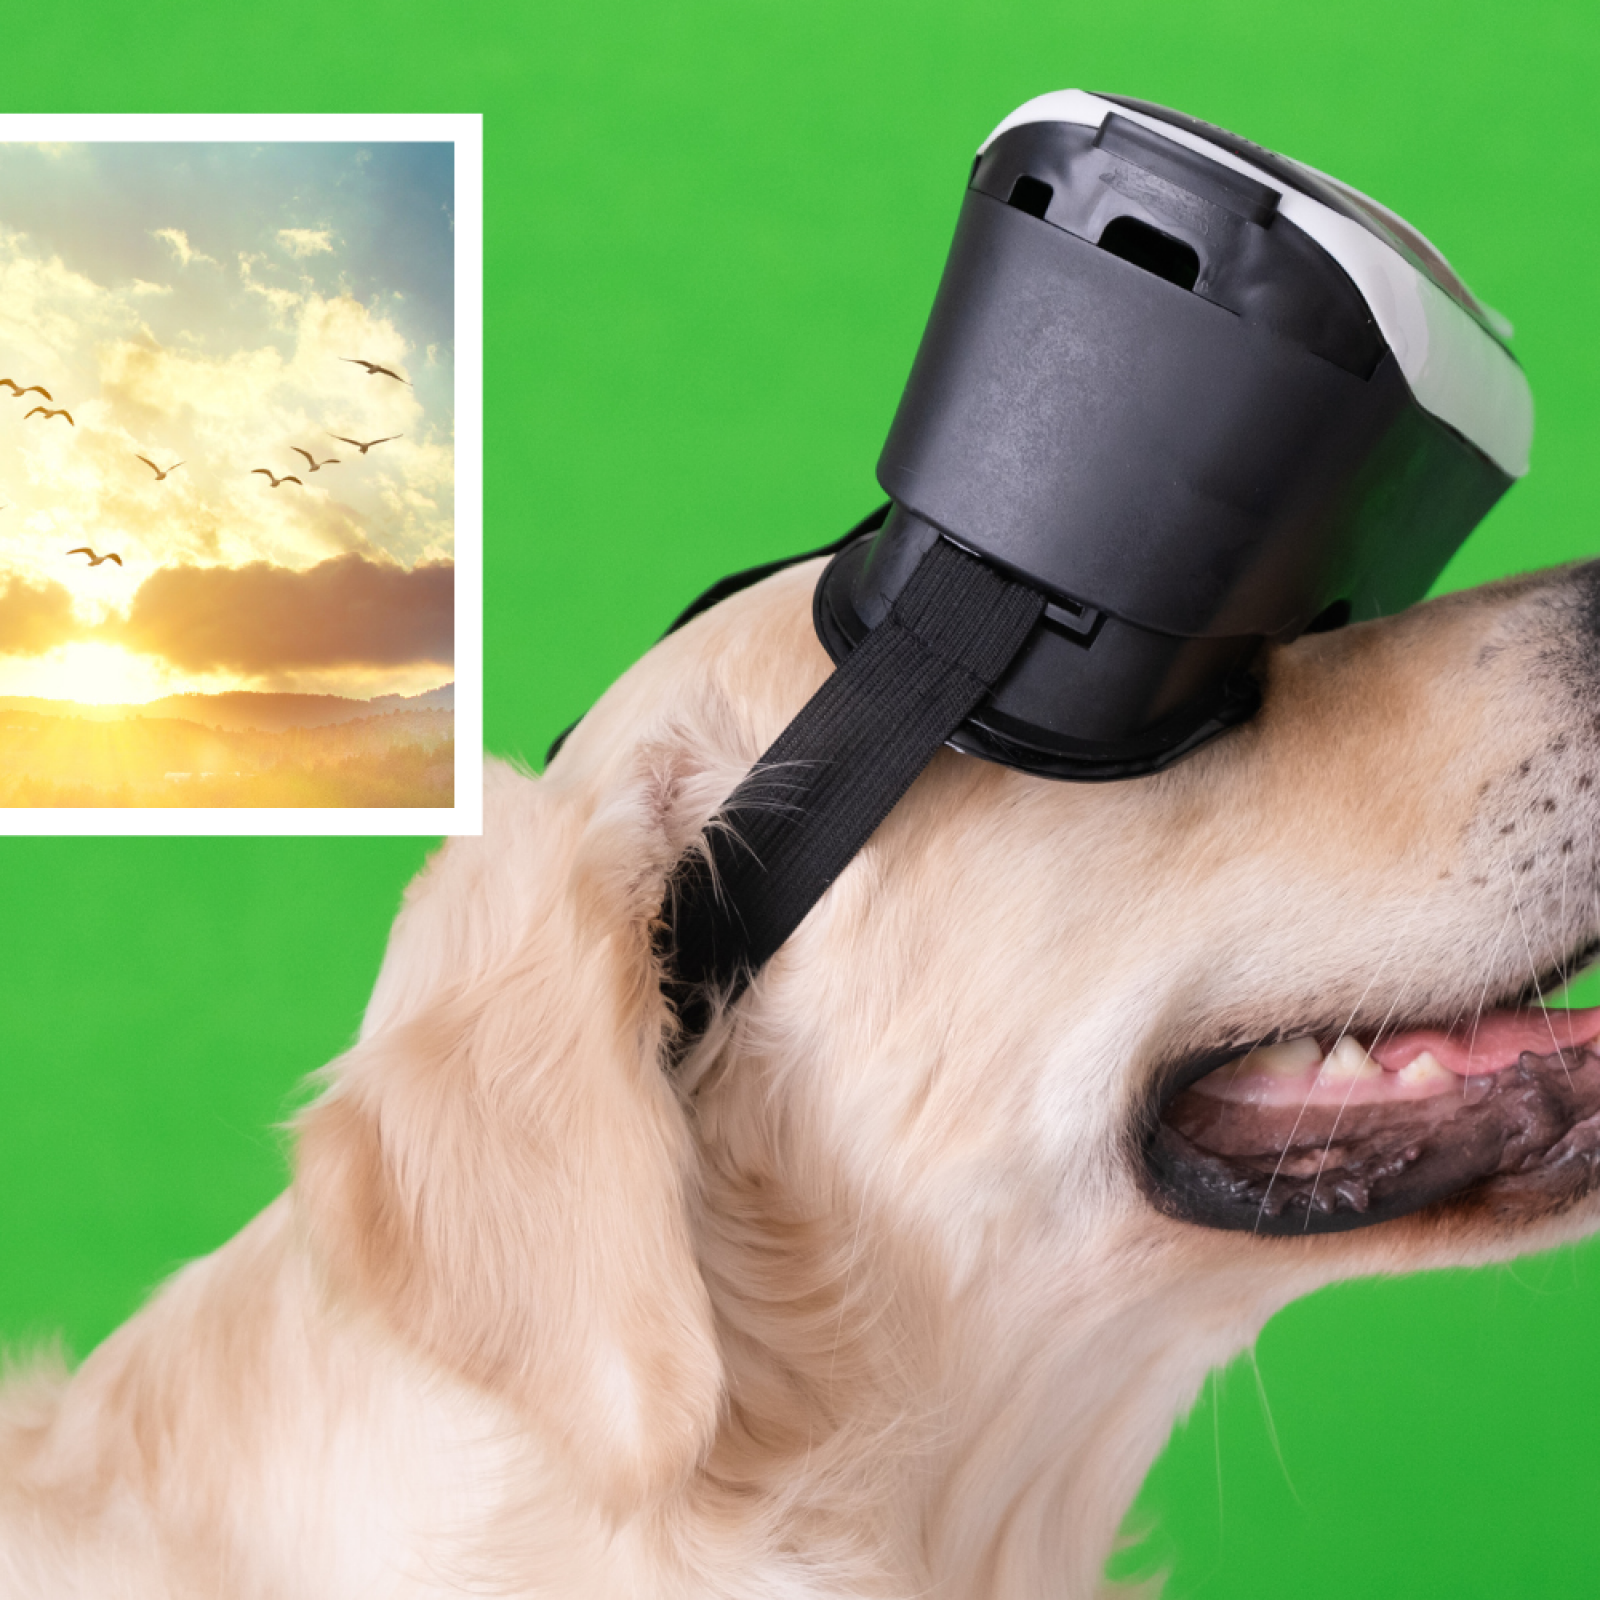 Golden Retriever Watches Birds While Trying VR Headset in Heartwarming Clip